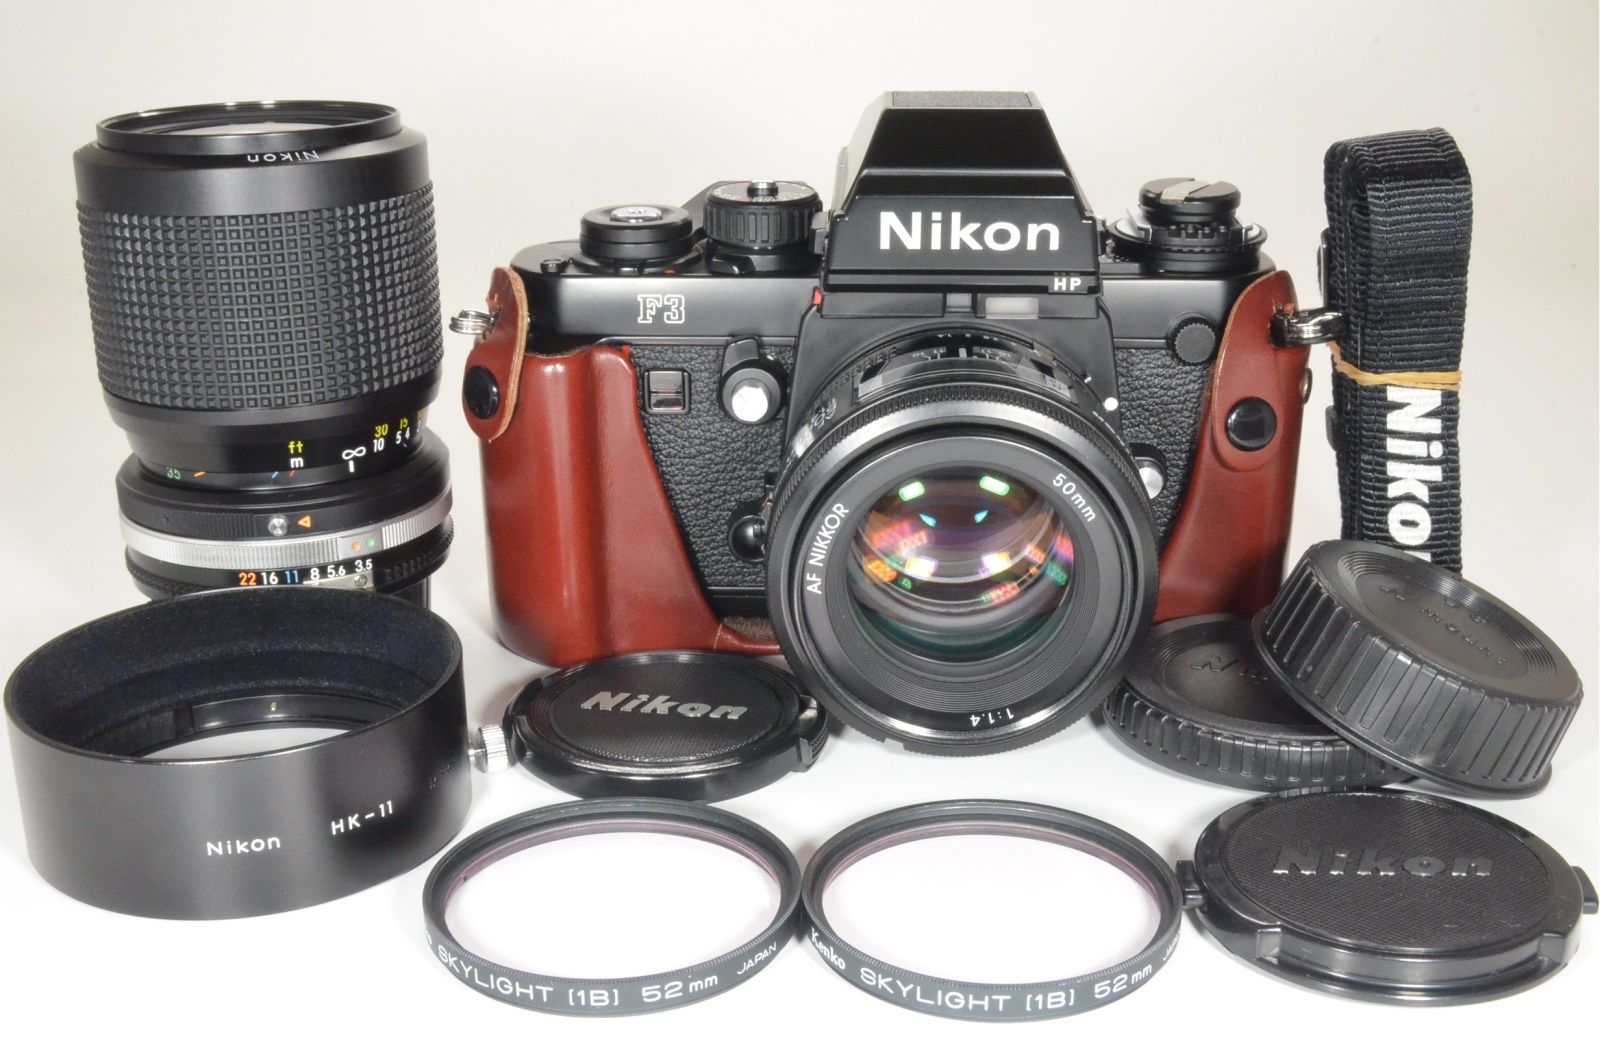 nikon f3 hp w/ nikkor 50mm f1.4 and 35-105mm f3.5-4.5 shooting tested